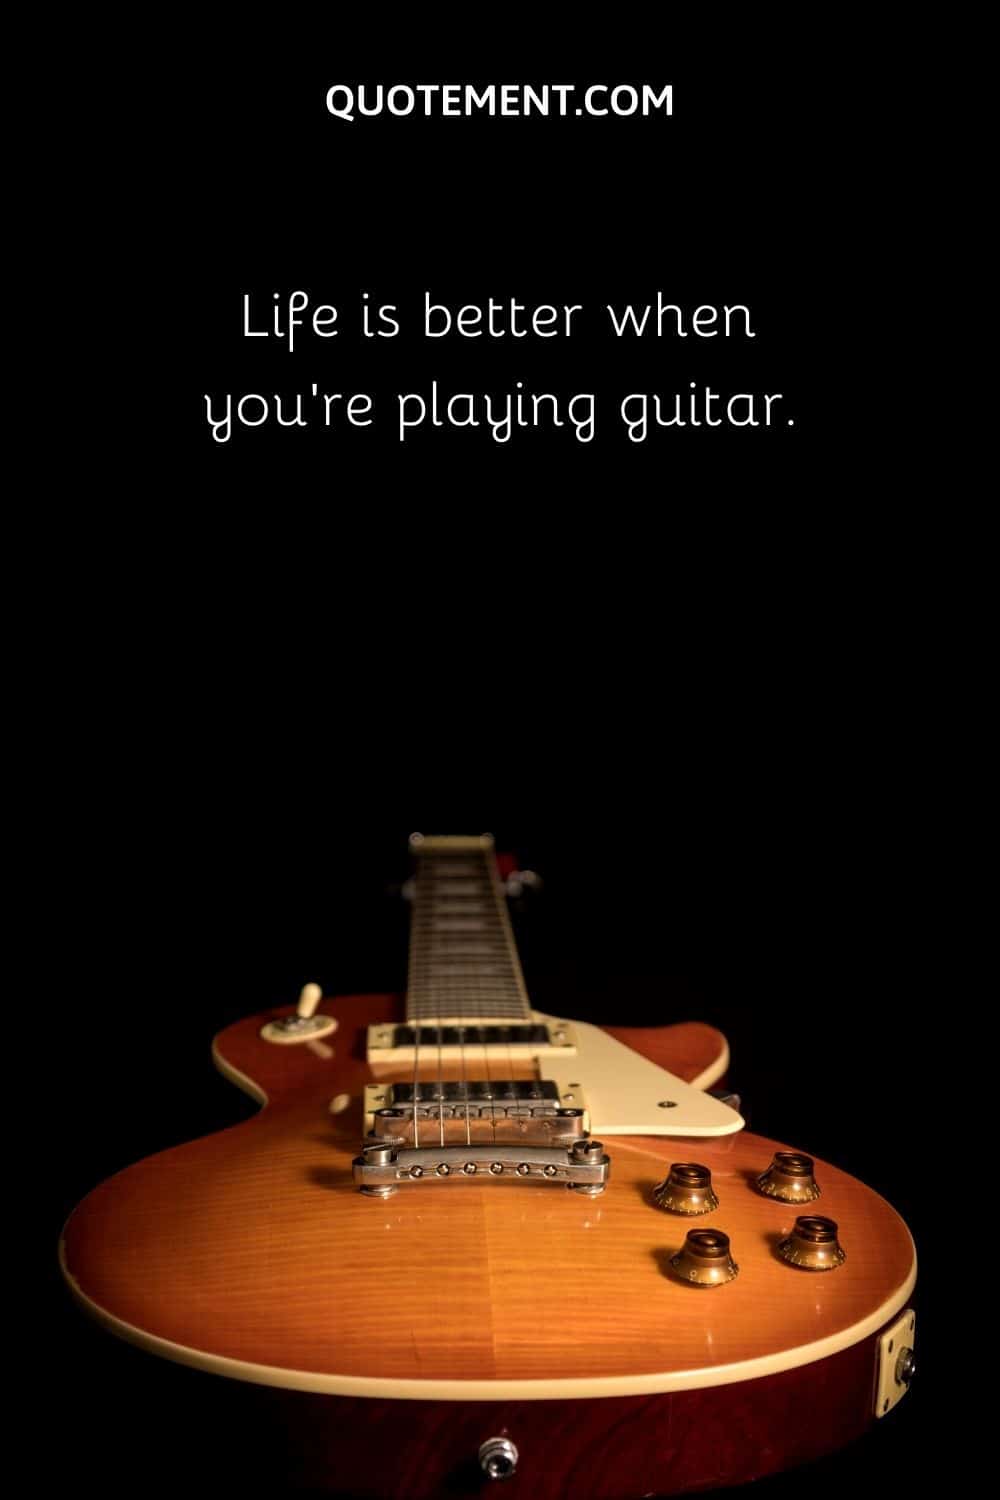 Life is better when you’re playing guitar.